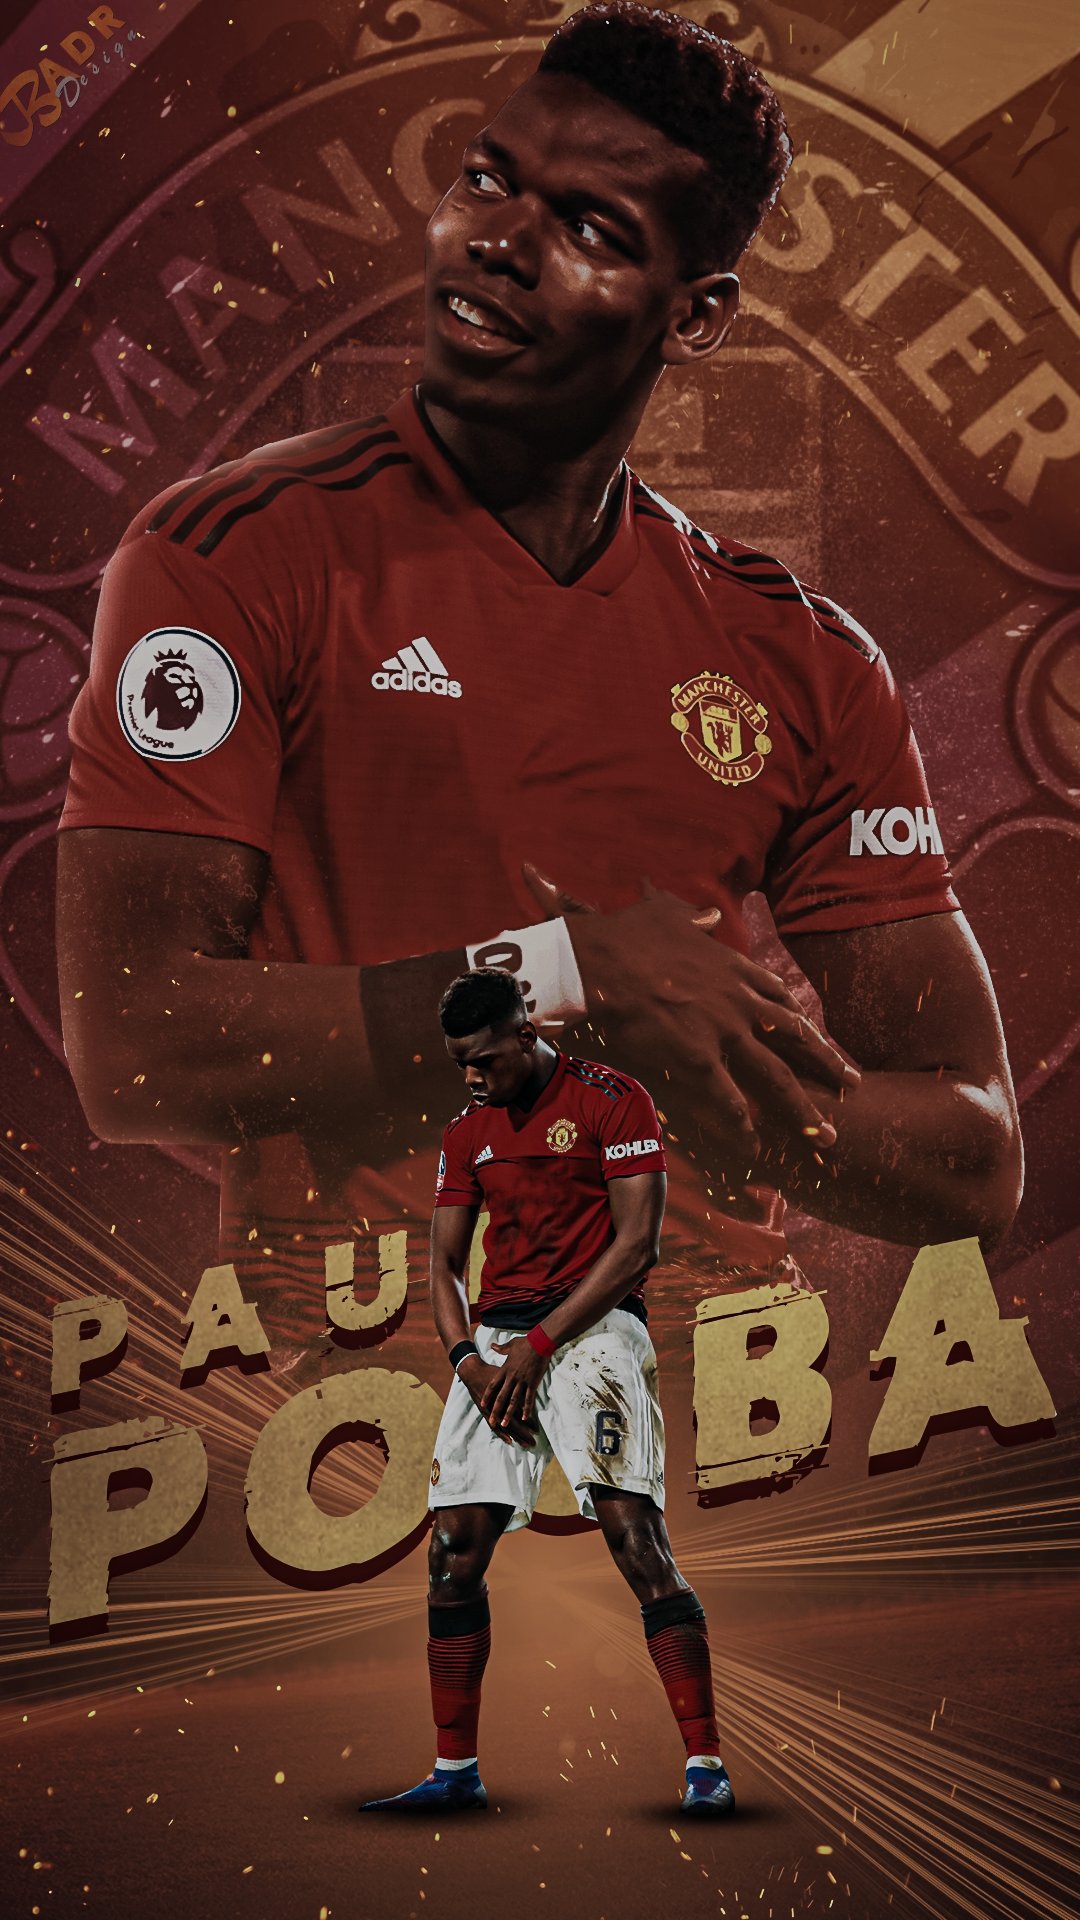 Pogba Wallpapers  Manchester united wallpaper Manchester united soccer  Paul pogba manchester united